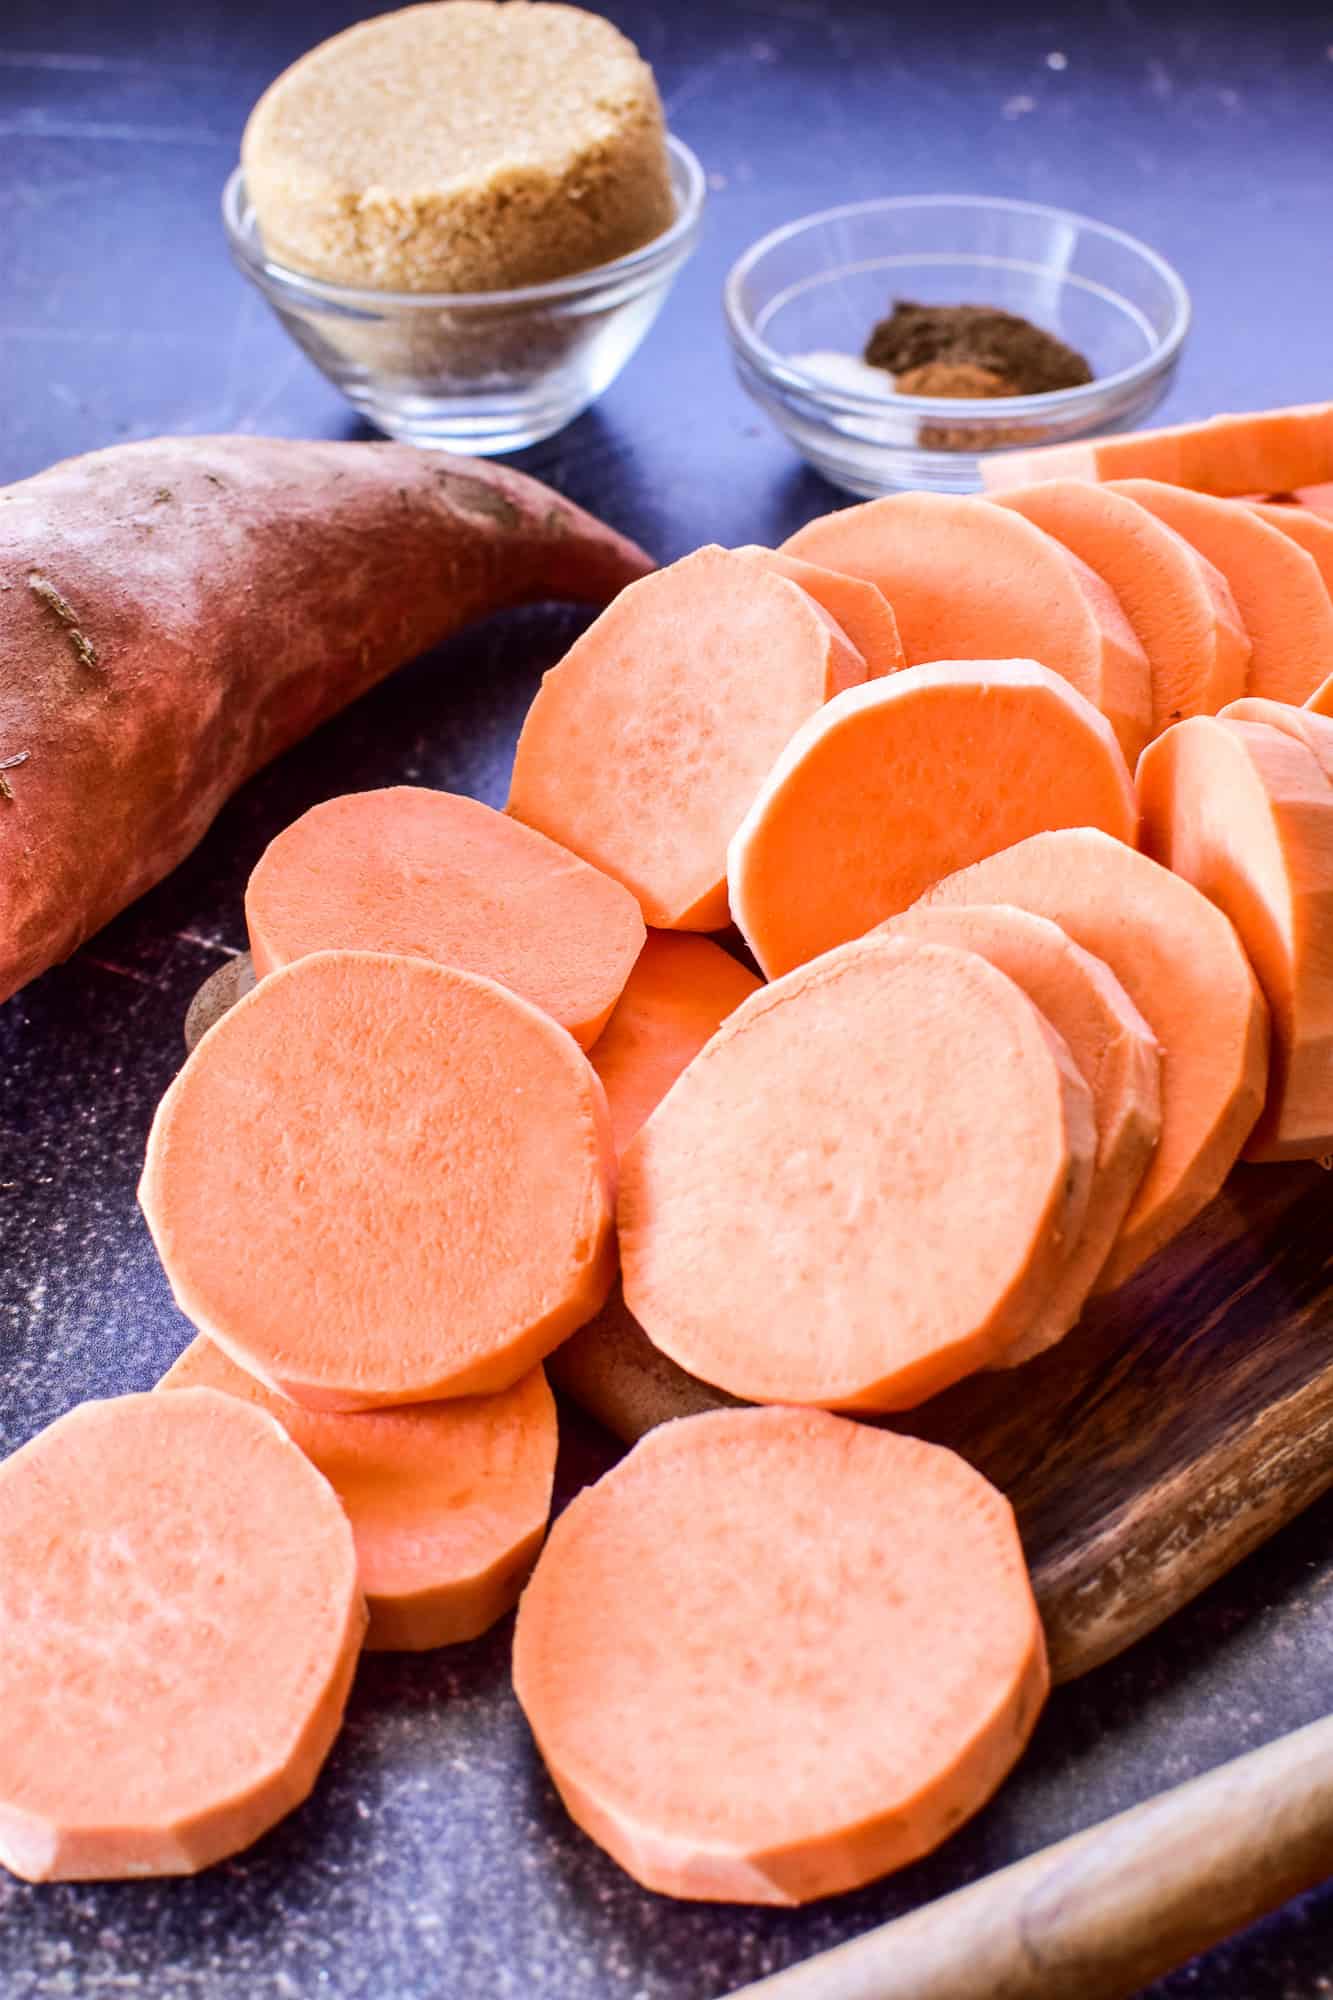 Peeled, sliced sweet potatoes with brown sugar and spices